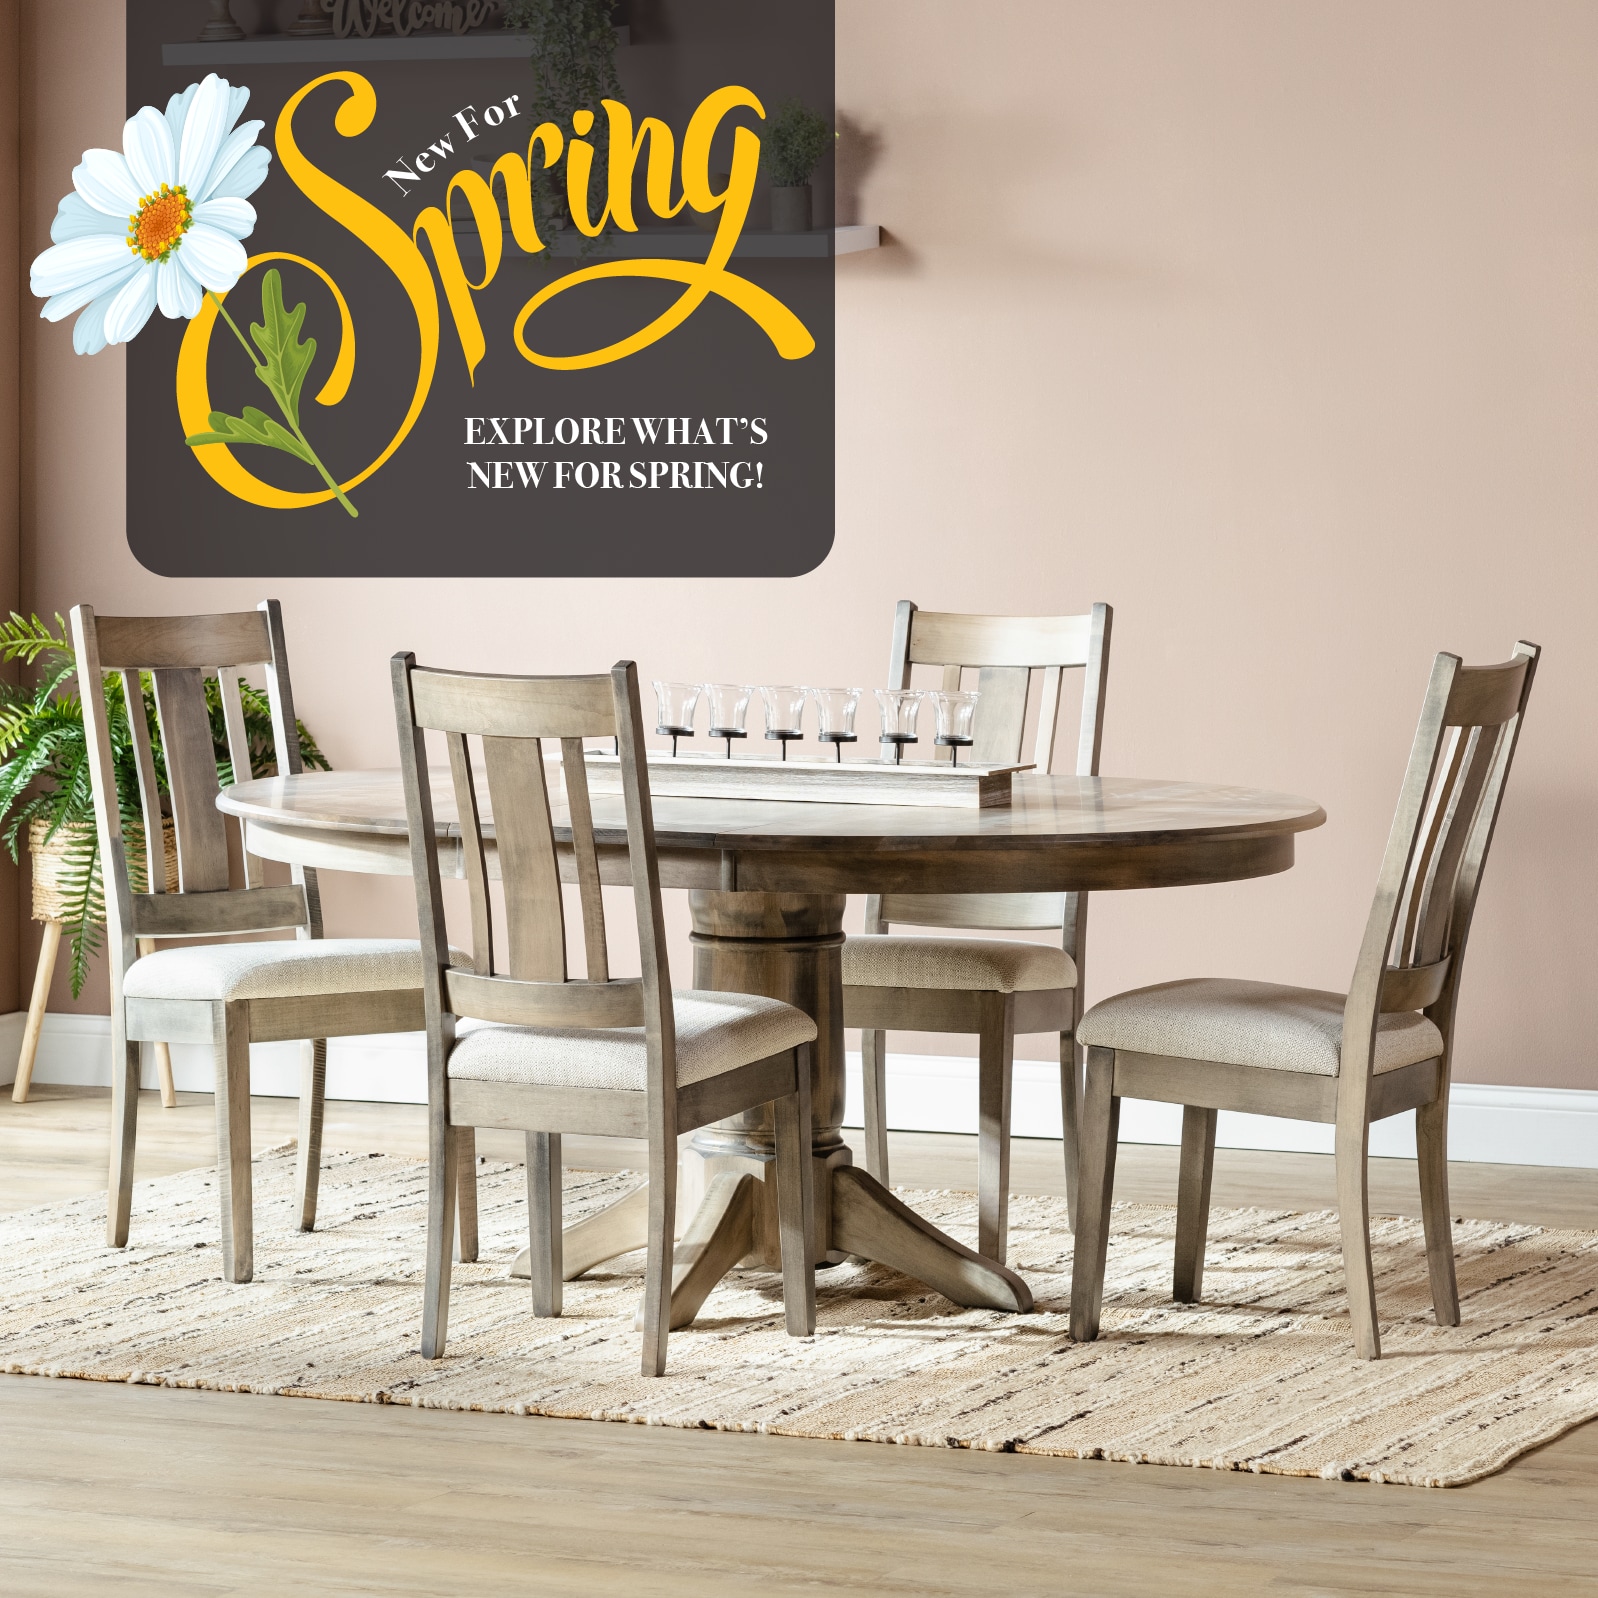 New For Spring Sale Dining